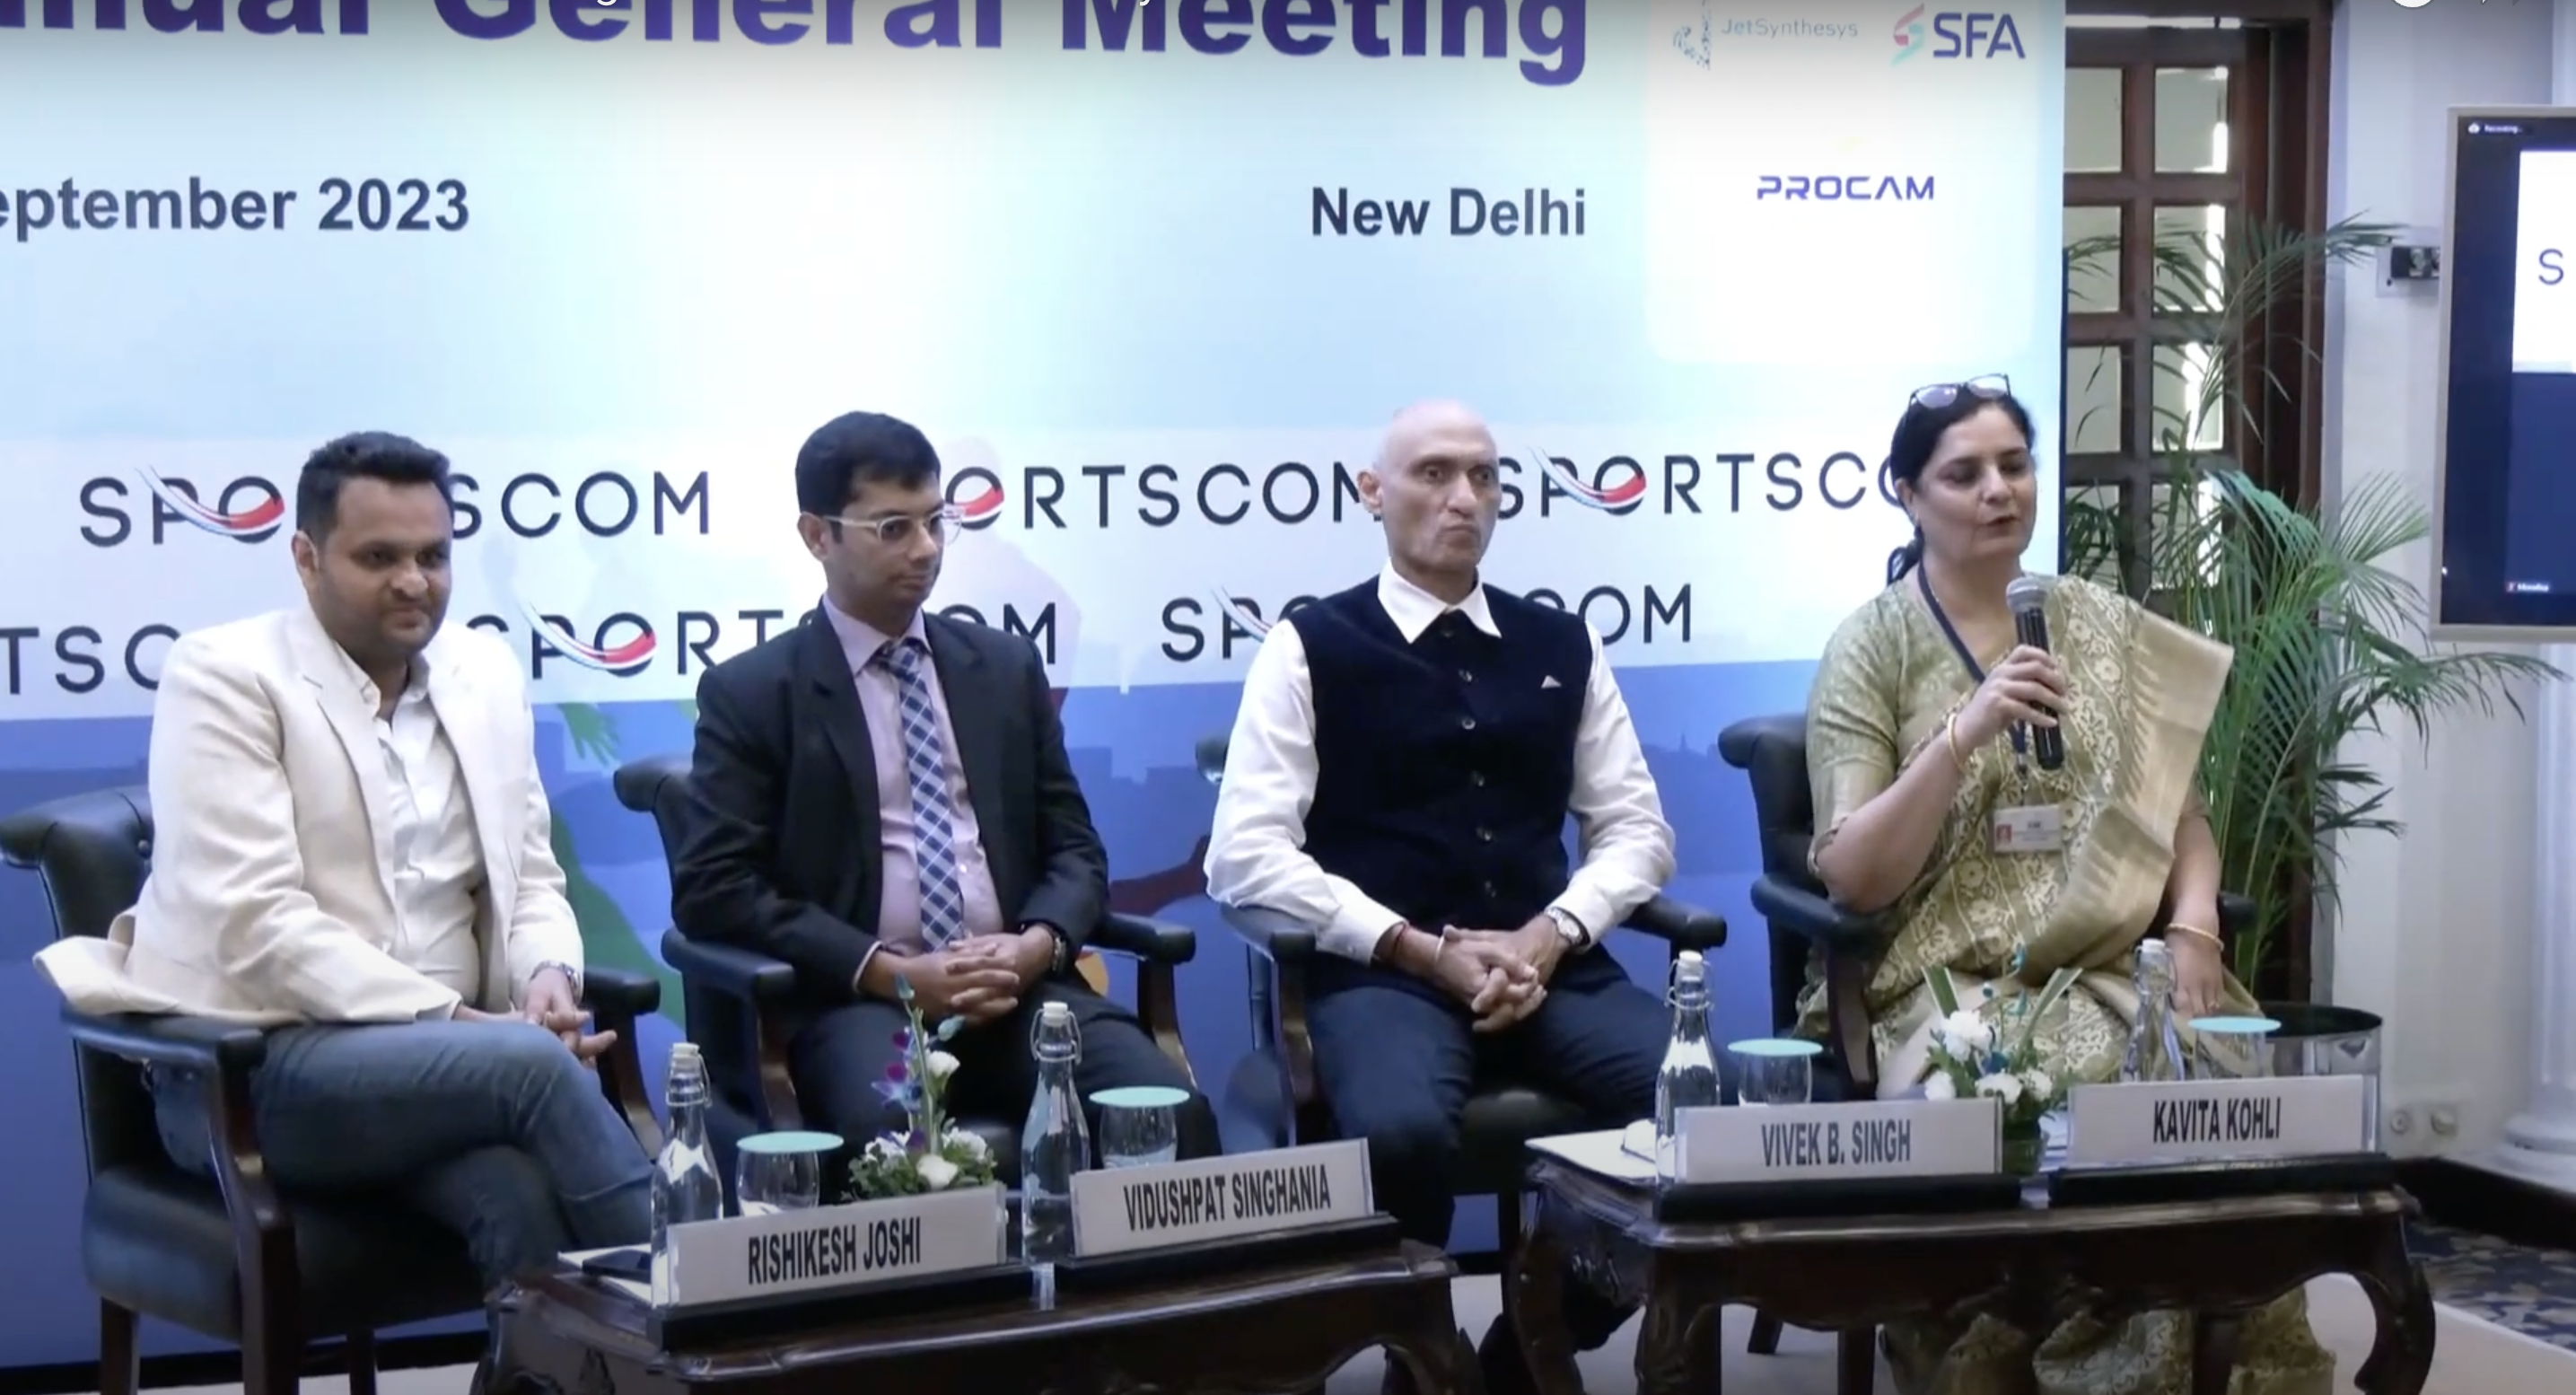 5th Annual General Meeting of SPORTSCOM Industry Confederation : VISION 2024-25 by Mr. Rishikesh Joshi, Secretary SPORTSCOM Industry Confederation.